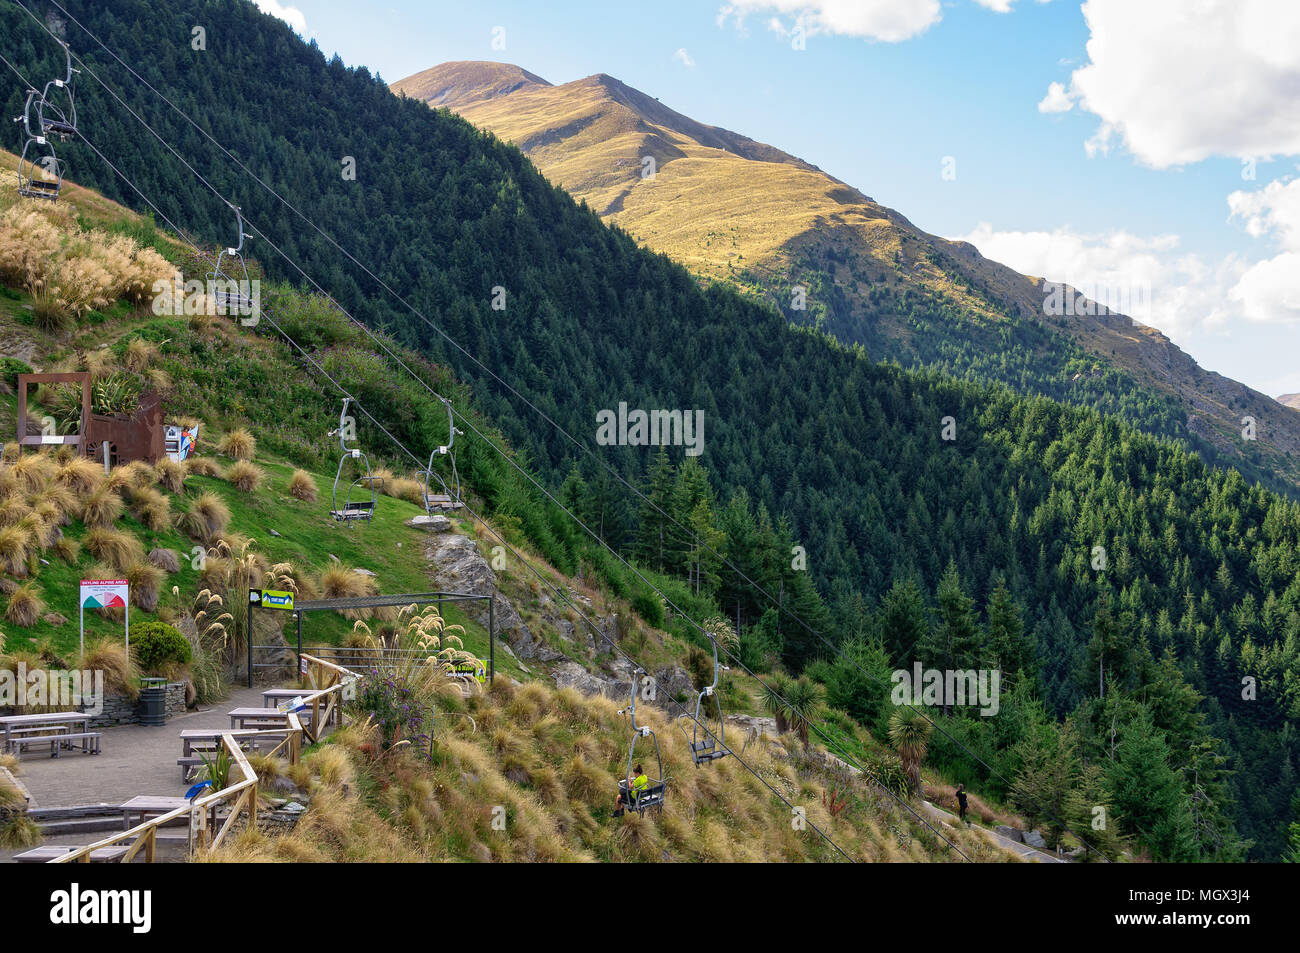 View from the upper terminal of Skyline Gondola - Queenstown, New Zealand Stock Photo